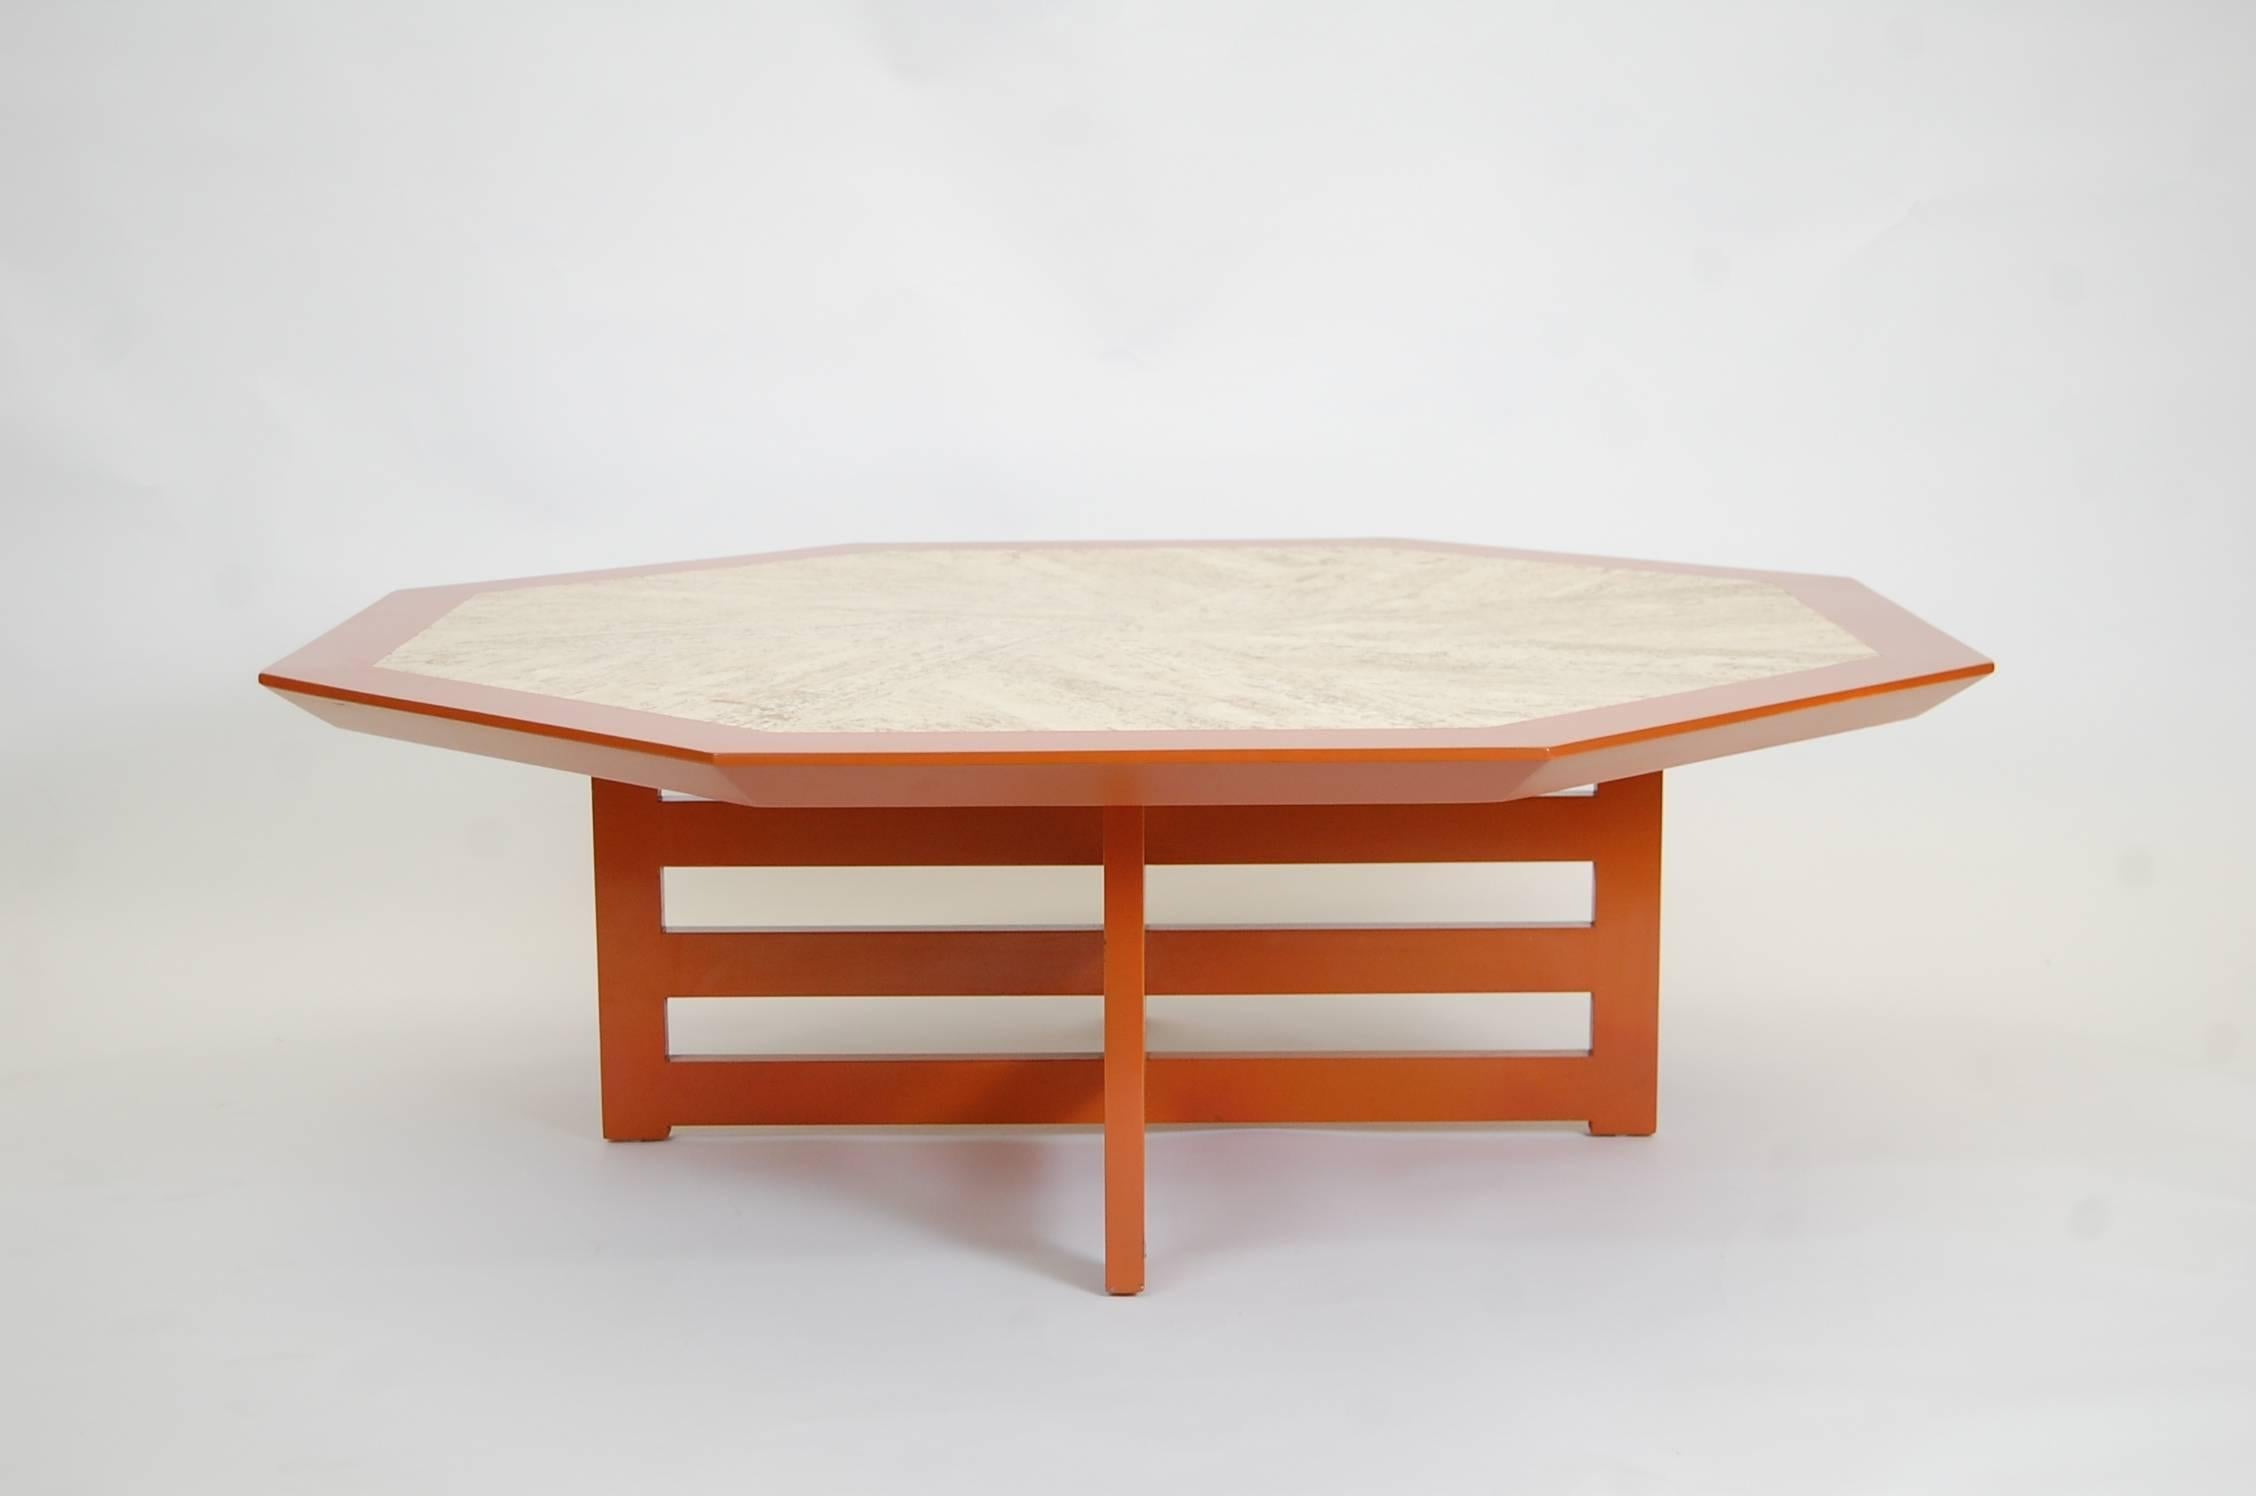 Octagonal travertine top coffee table in orange lacquer, designed and produced by Harvey Probber, circa 1958.